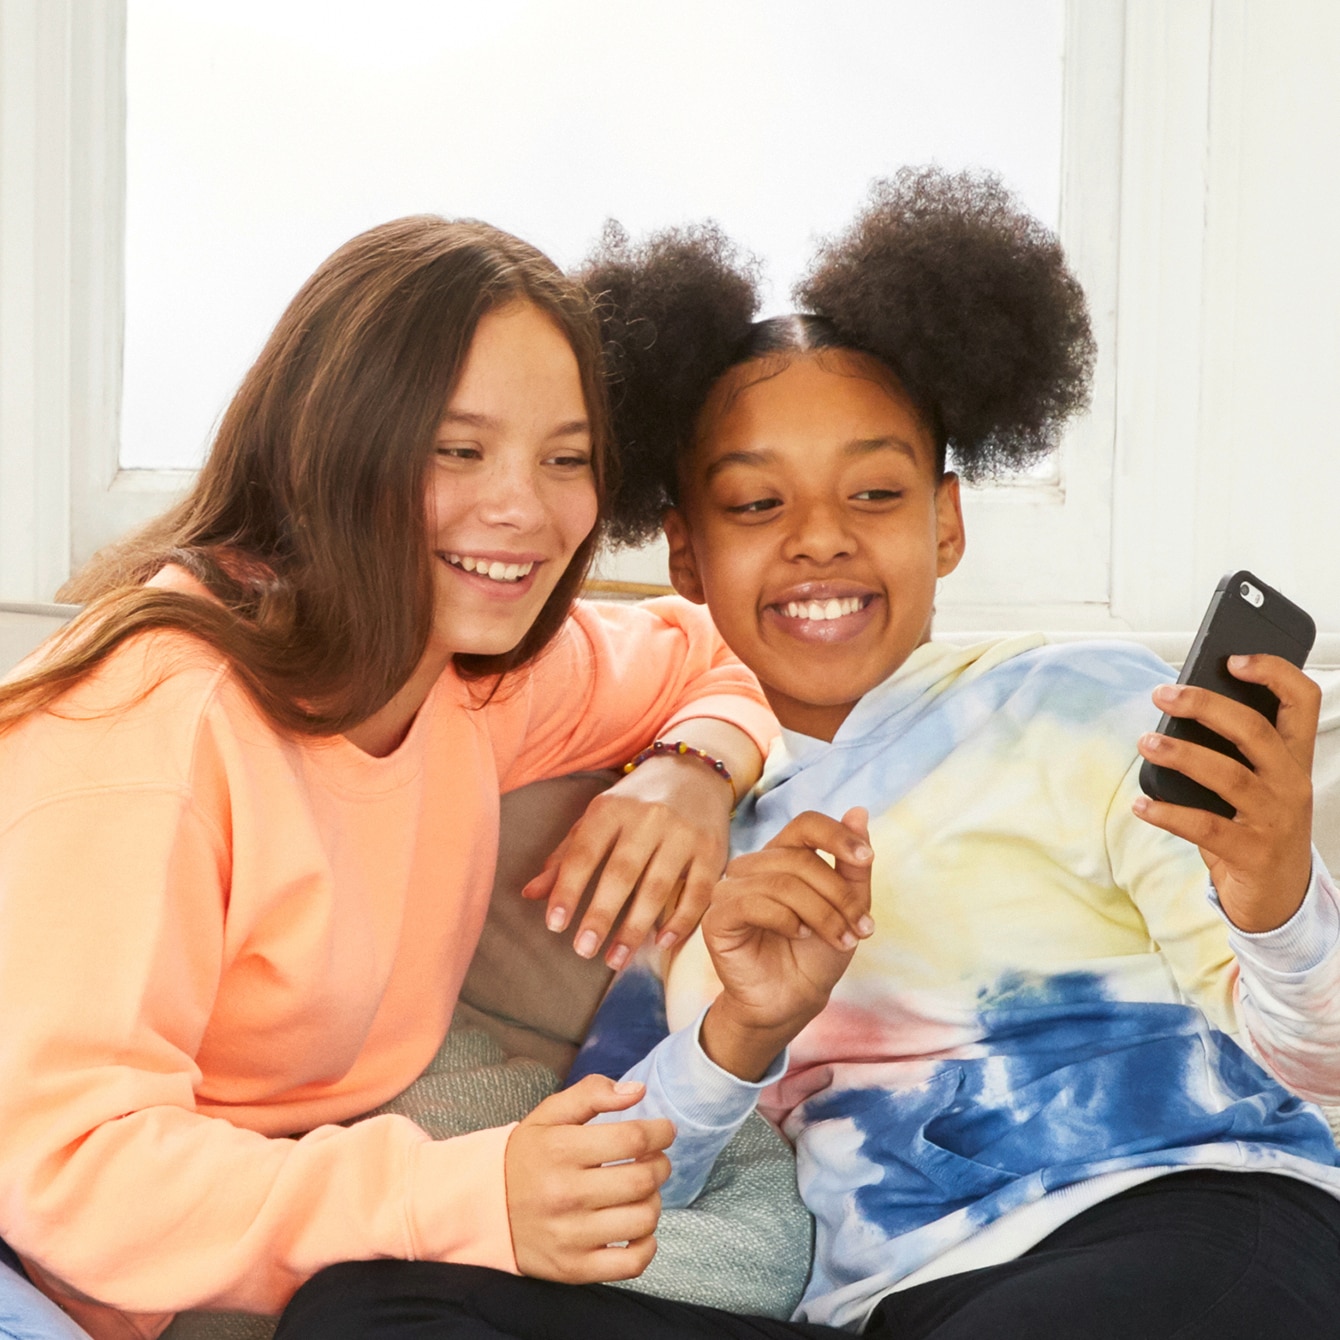 Dove How does social media affect teens?